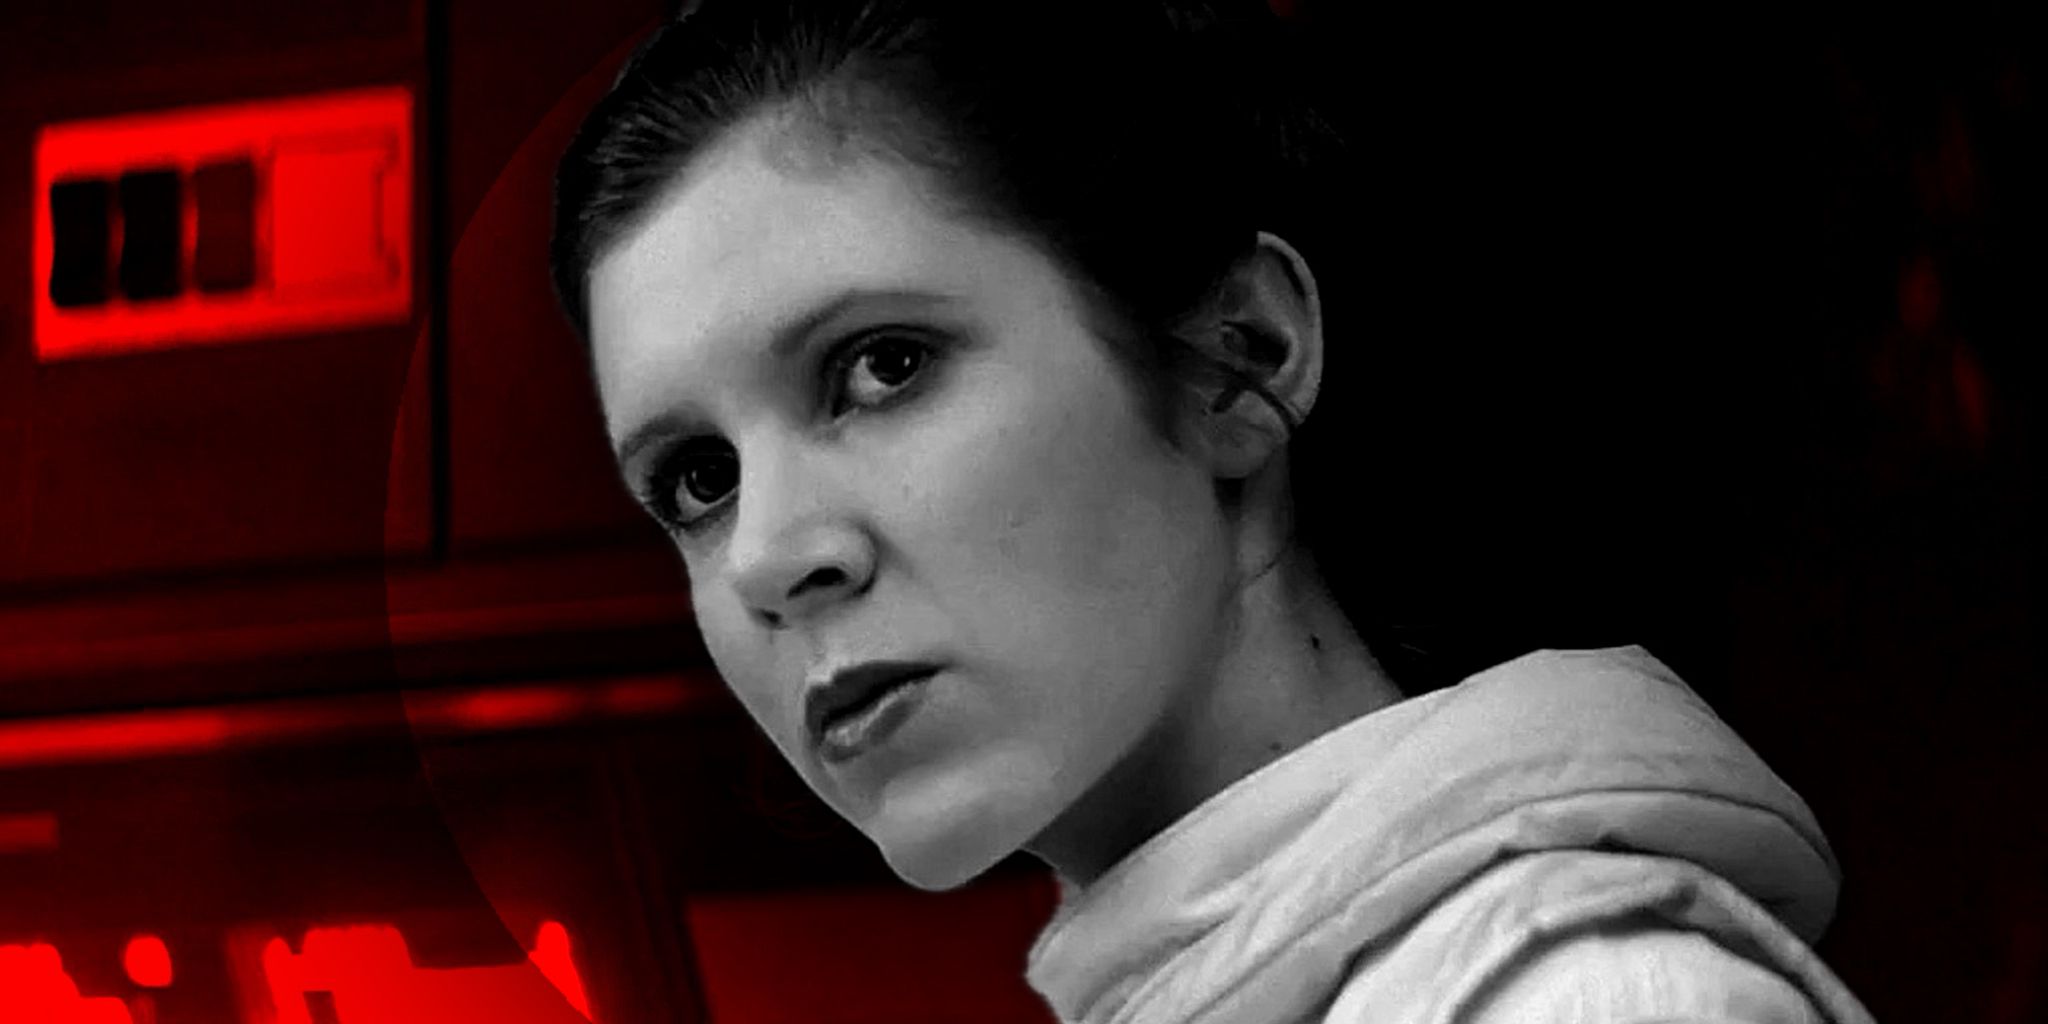 Carrie Fisher as Princess Leia Organa looking stern in The Empire Strikes Back